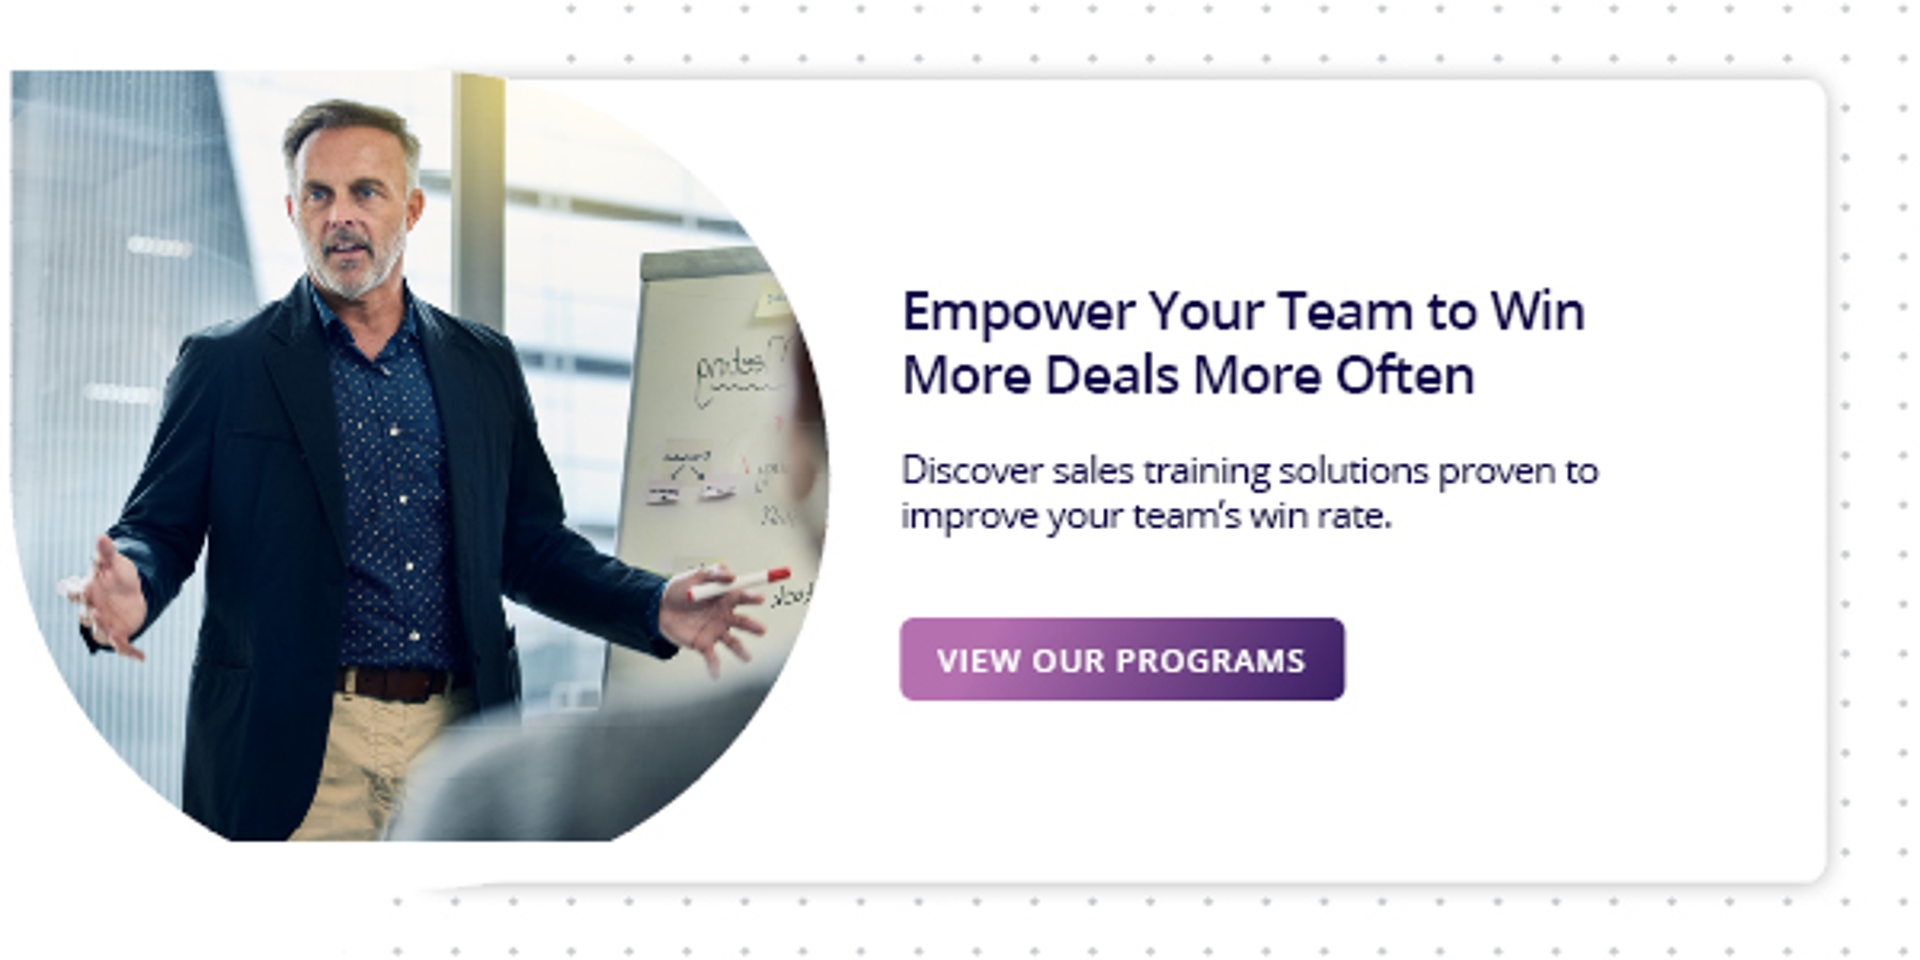 View sales training programs to win more business